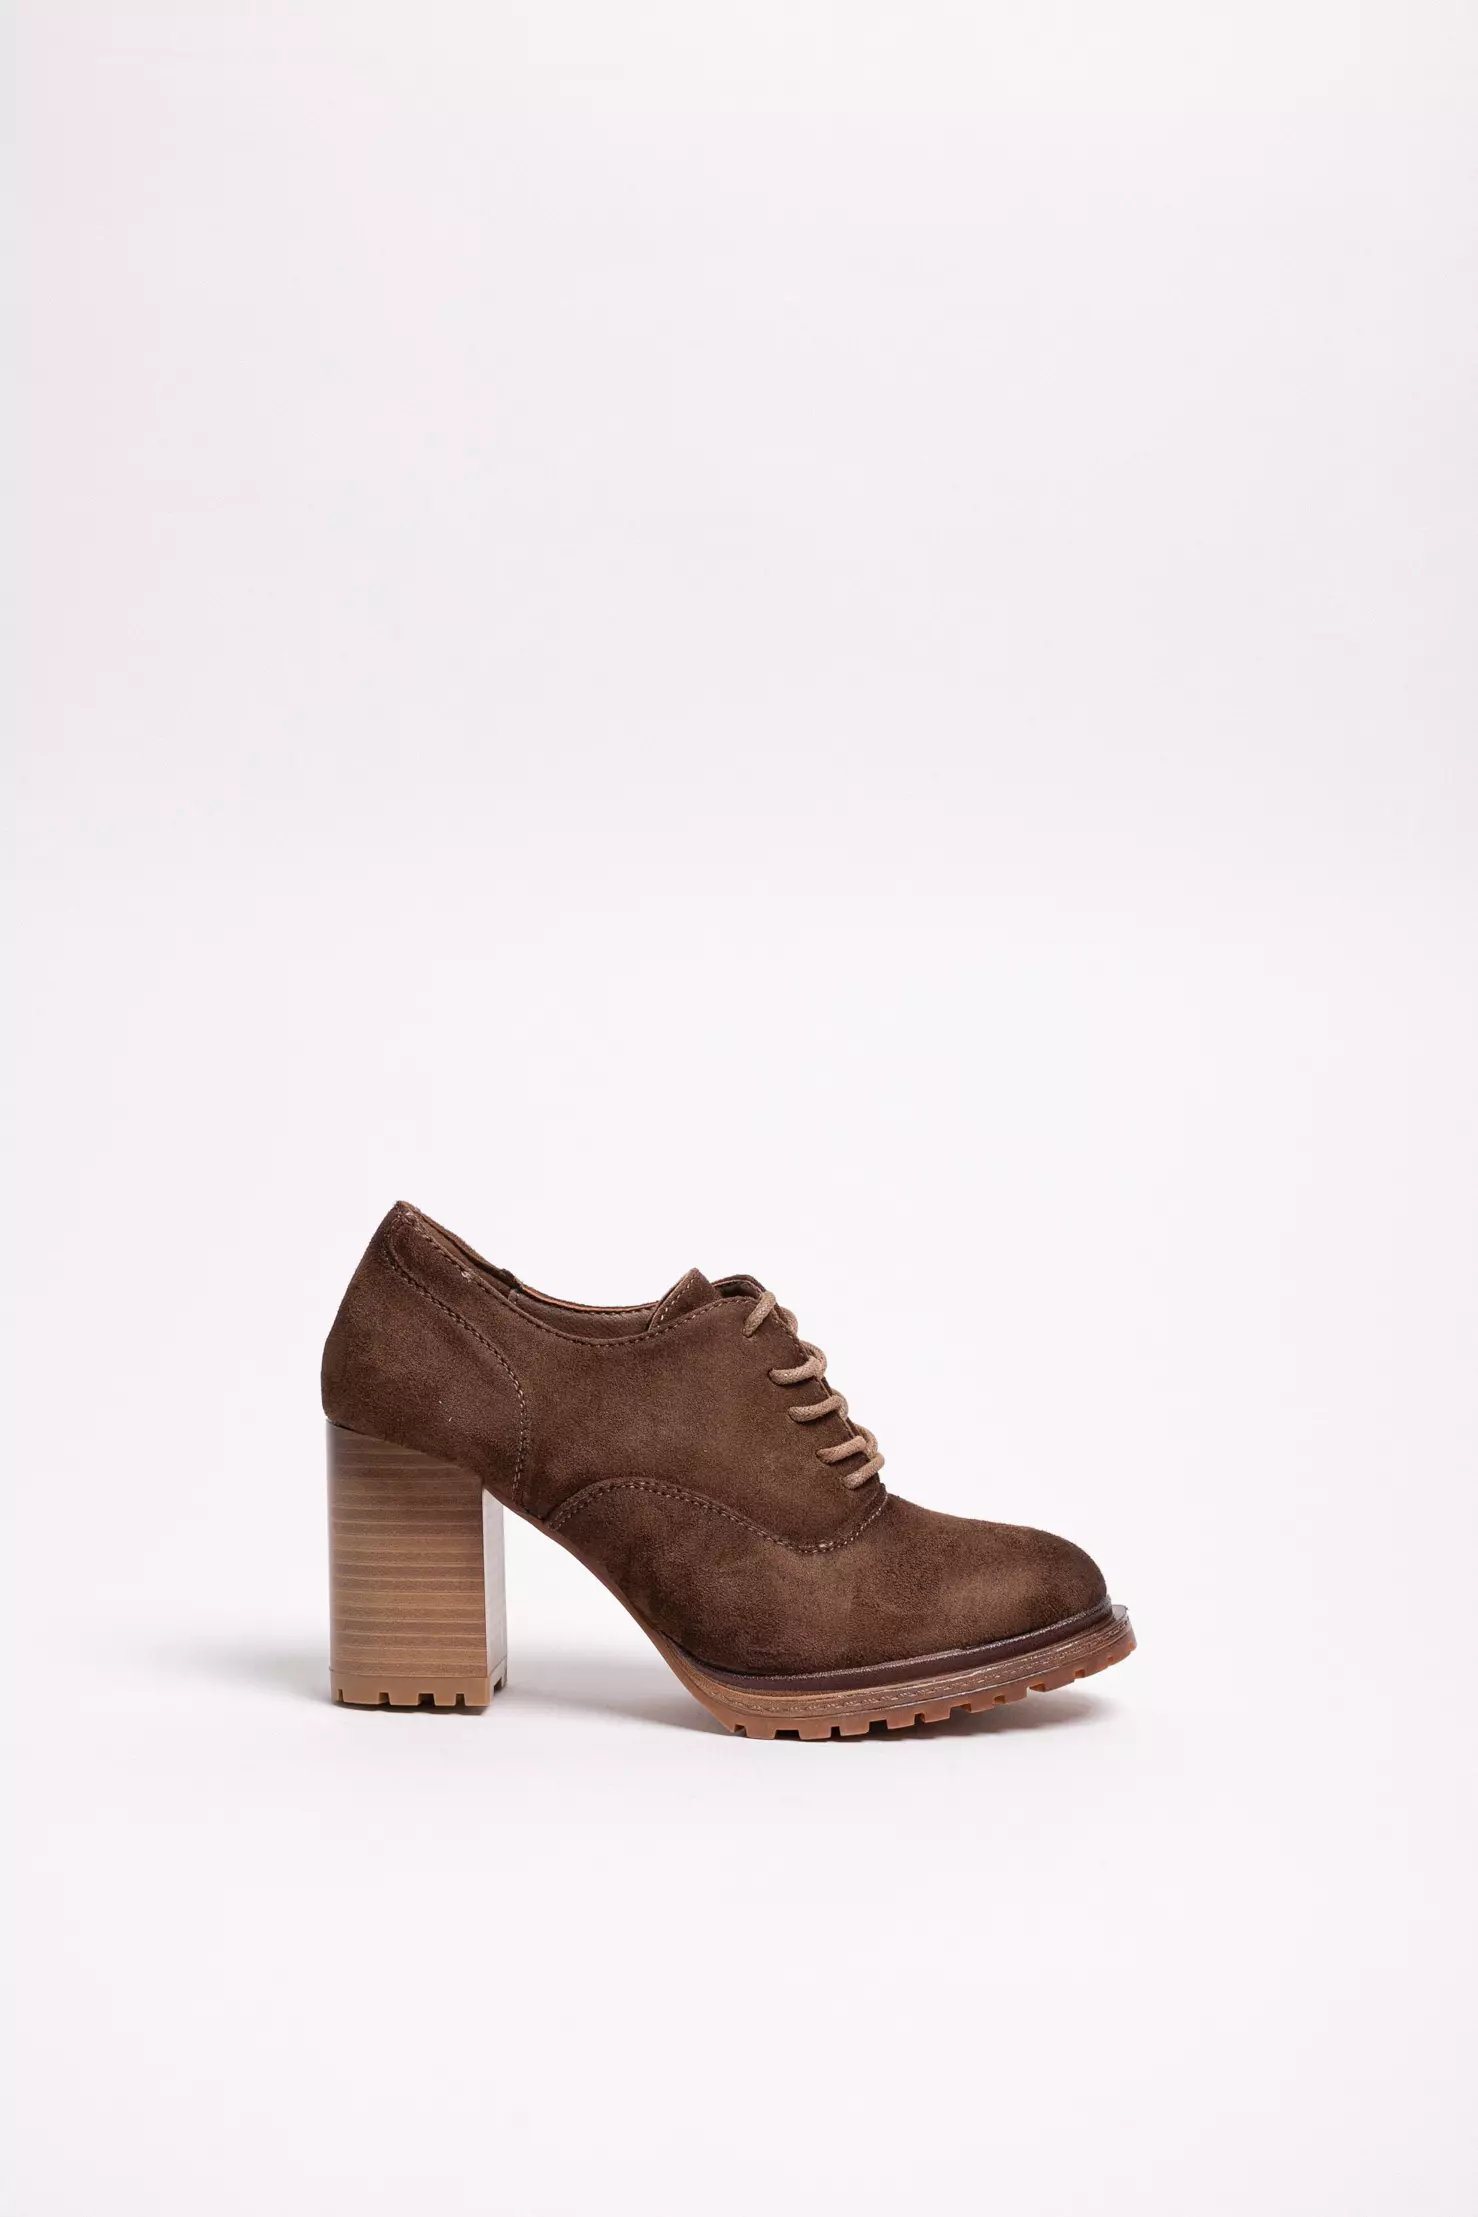 CHAUSSURE ALLURE - TAUPE